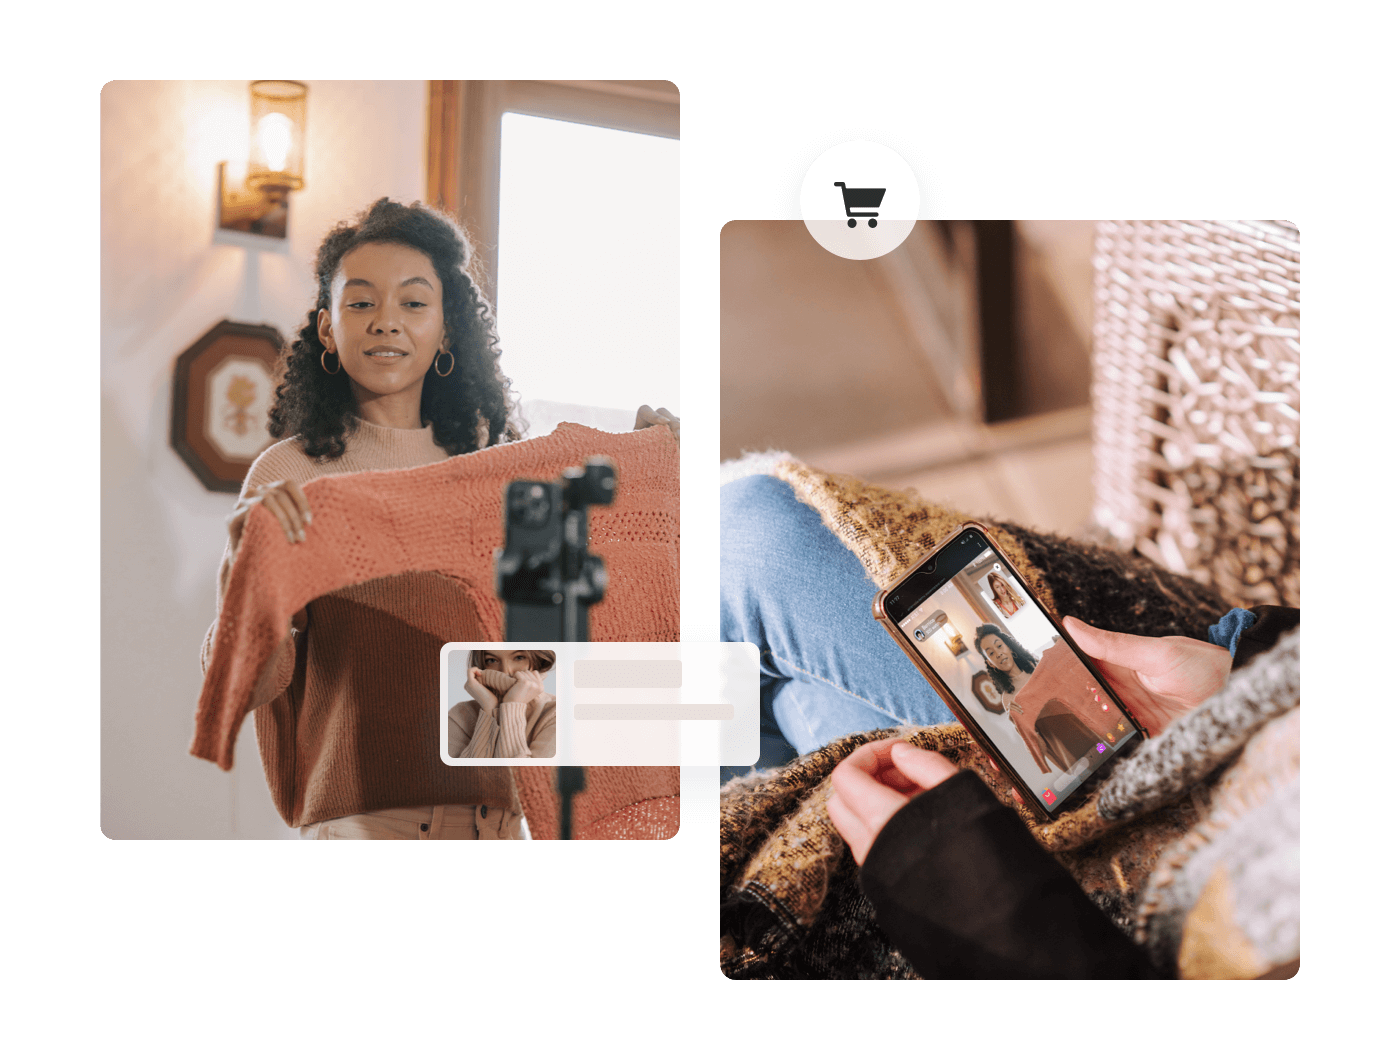 Add Stunning Live Streaming to Your E-commerce Platform